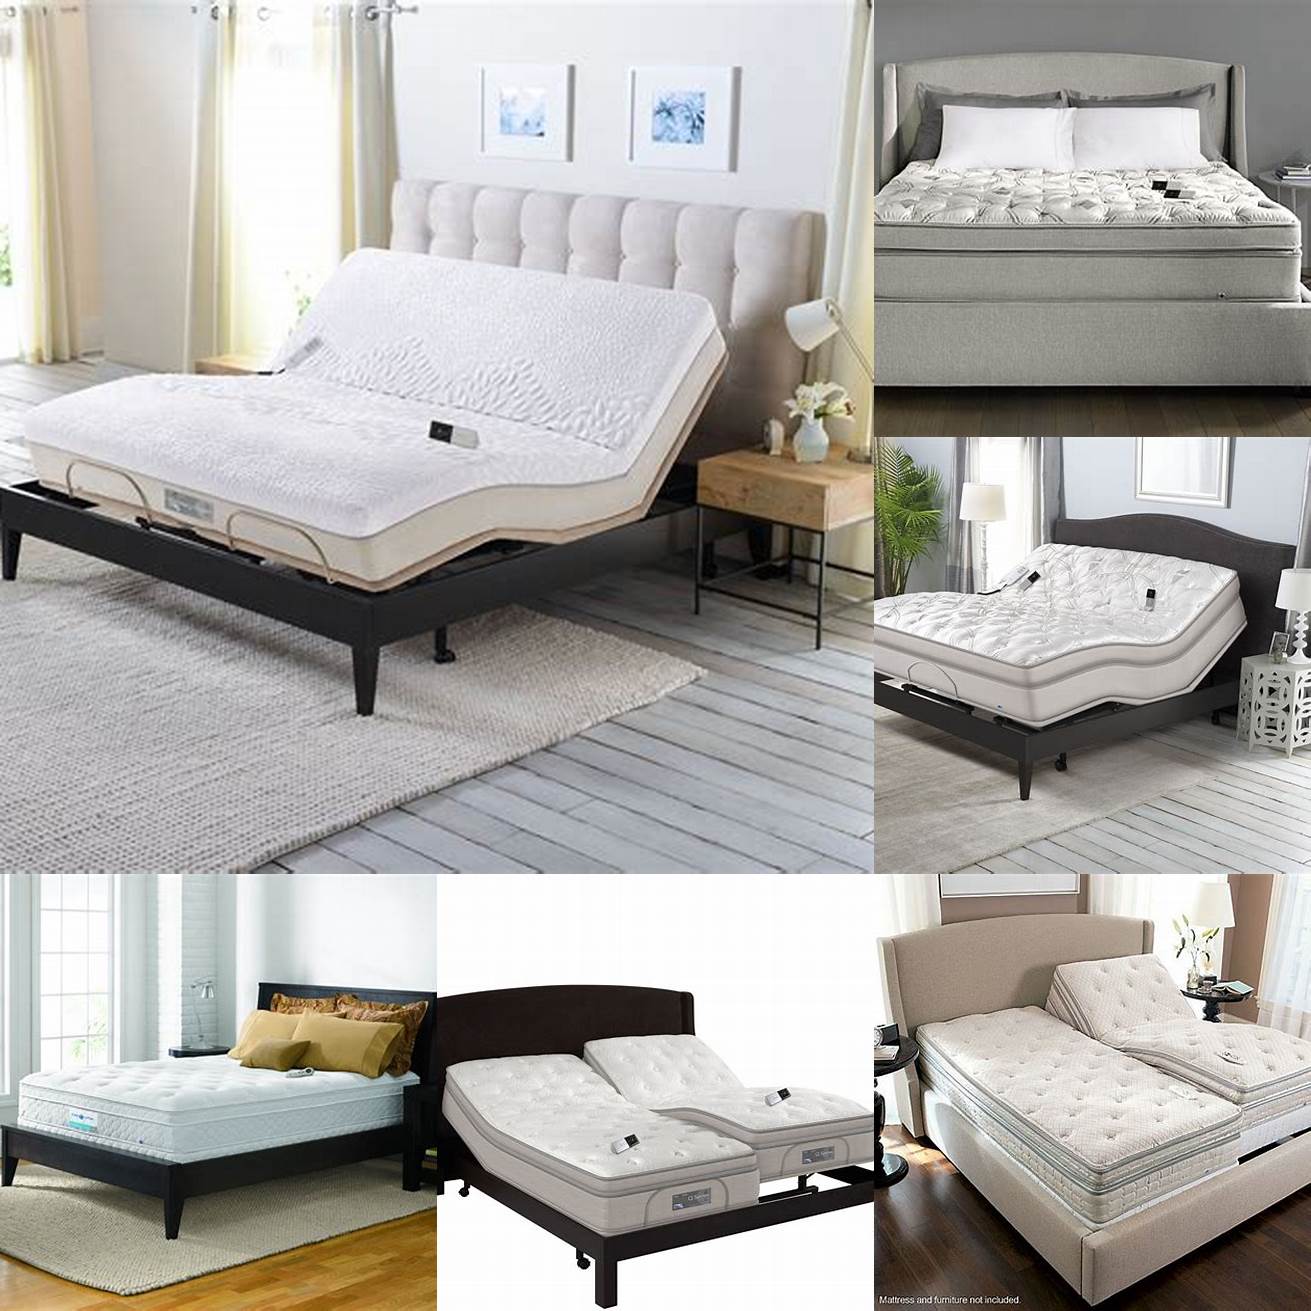 Image of the Sleep Number Bed Frame with a Sleep Number mattress